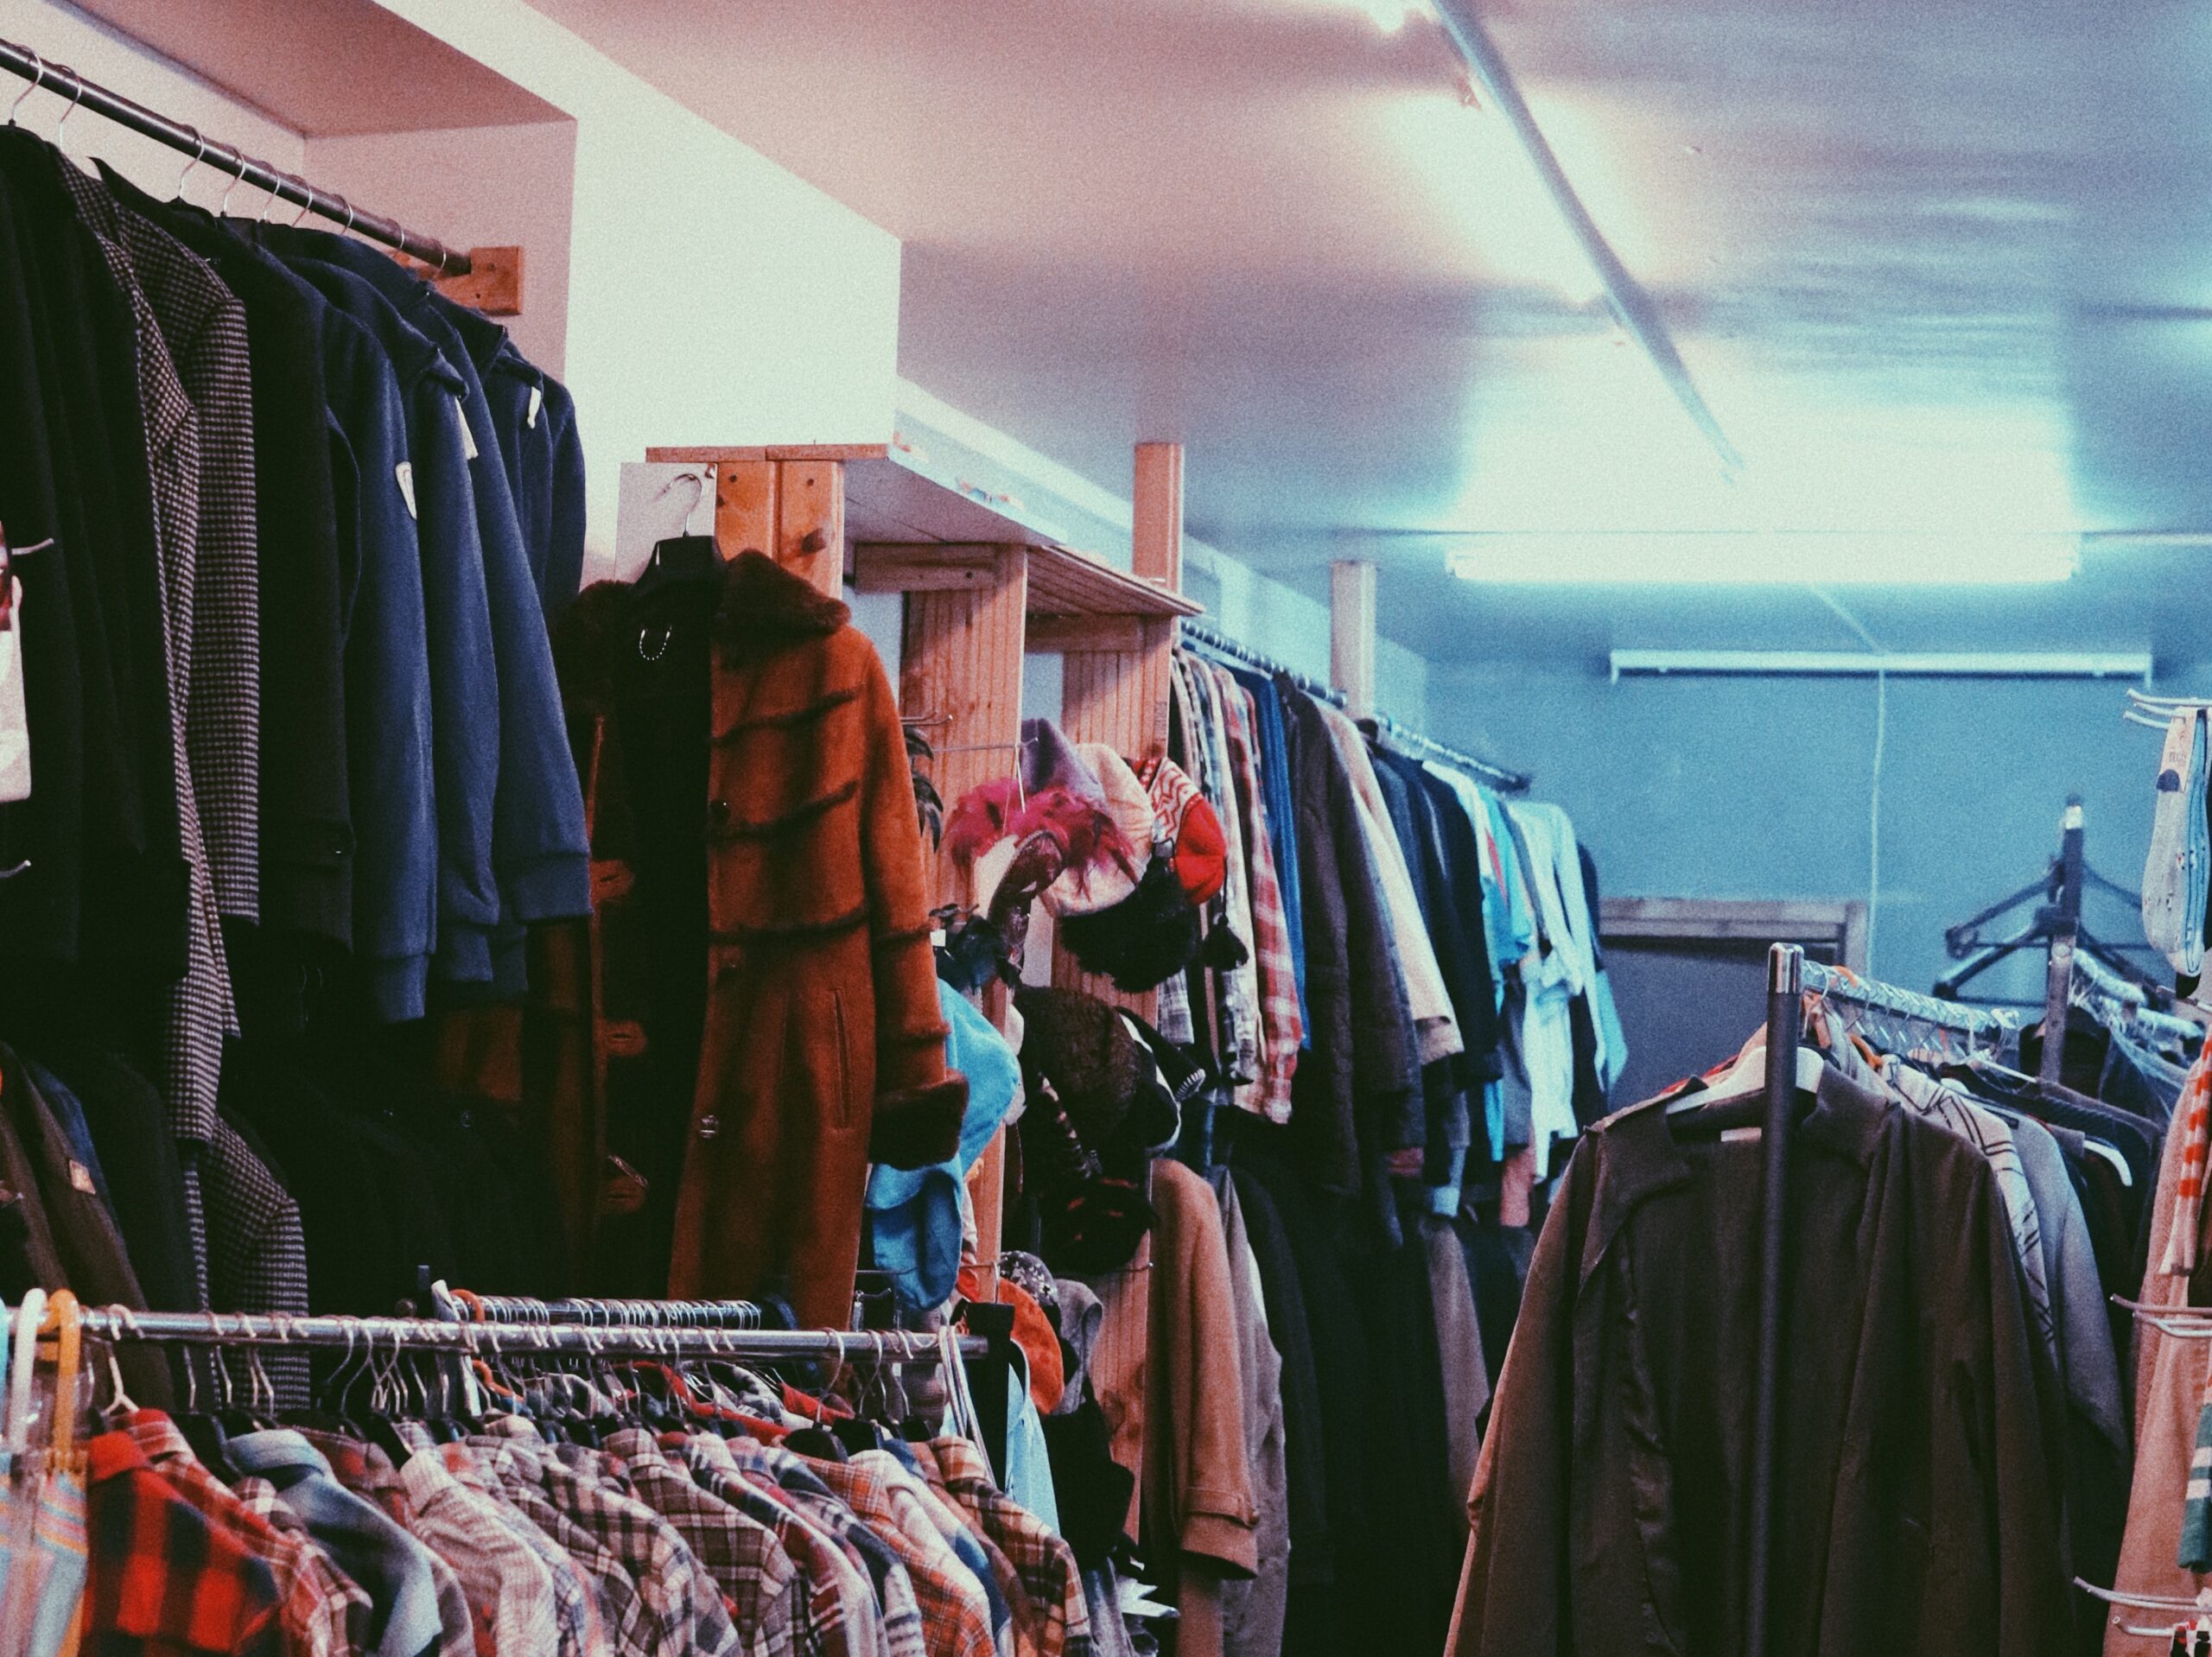 Clothes in a secondhand shop